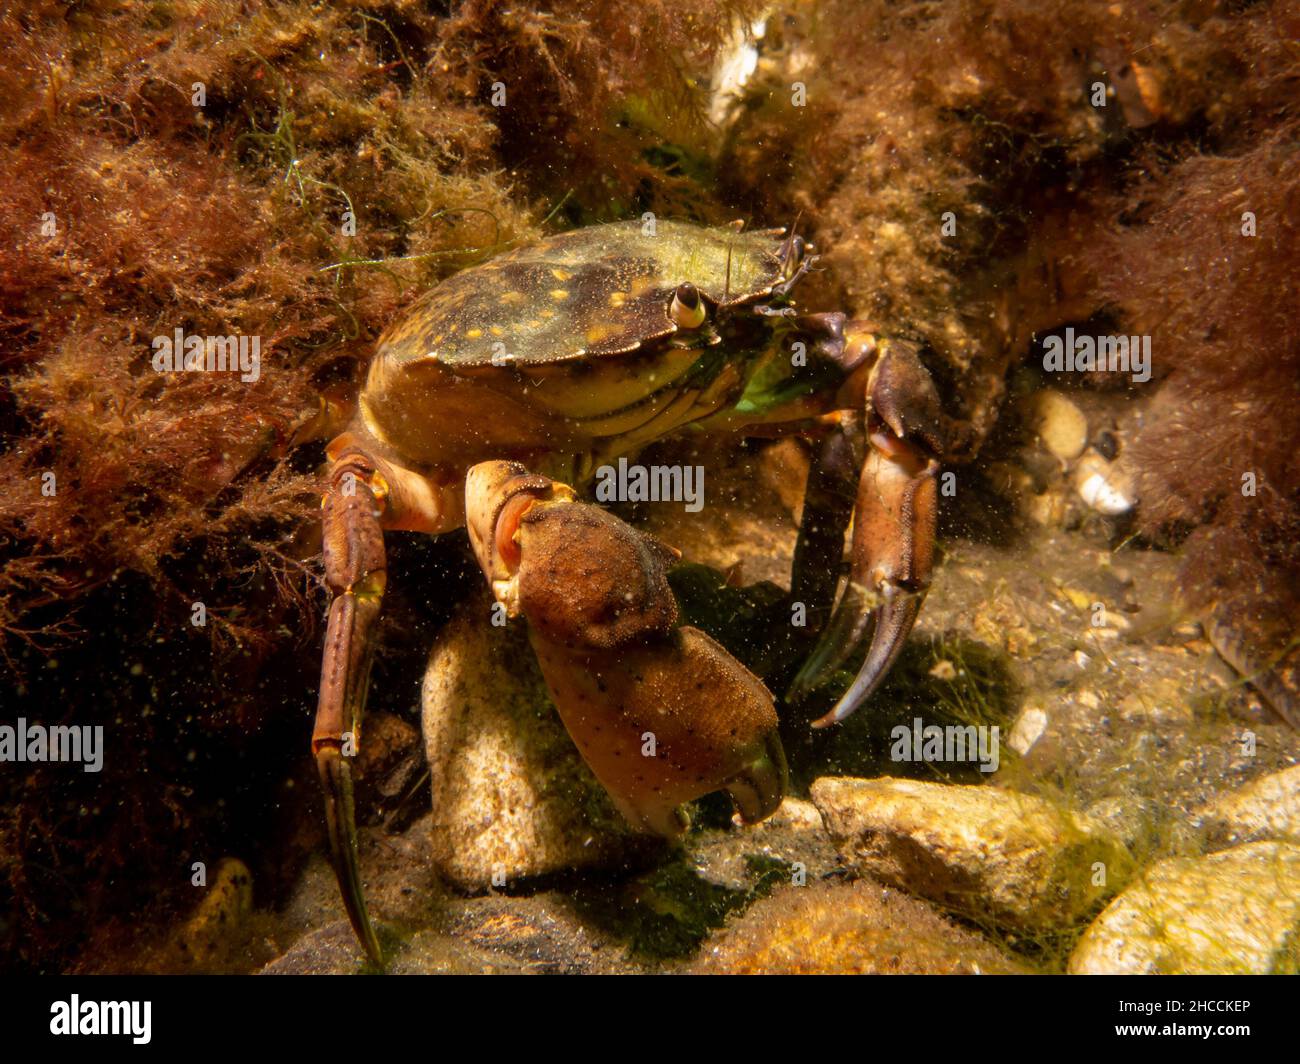 A close-up picture of a crab among seaweed. Picture from The Sound, between Sweden and Denmark Stock Photo